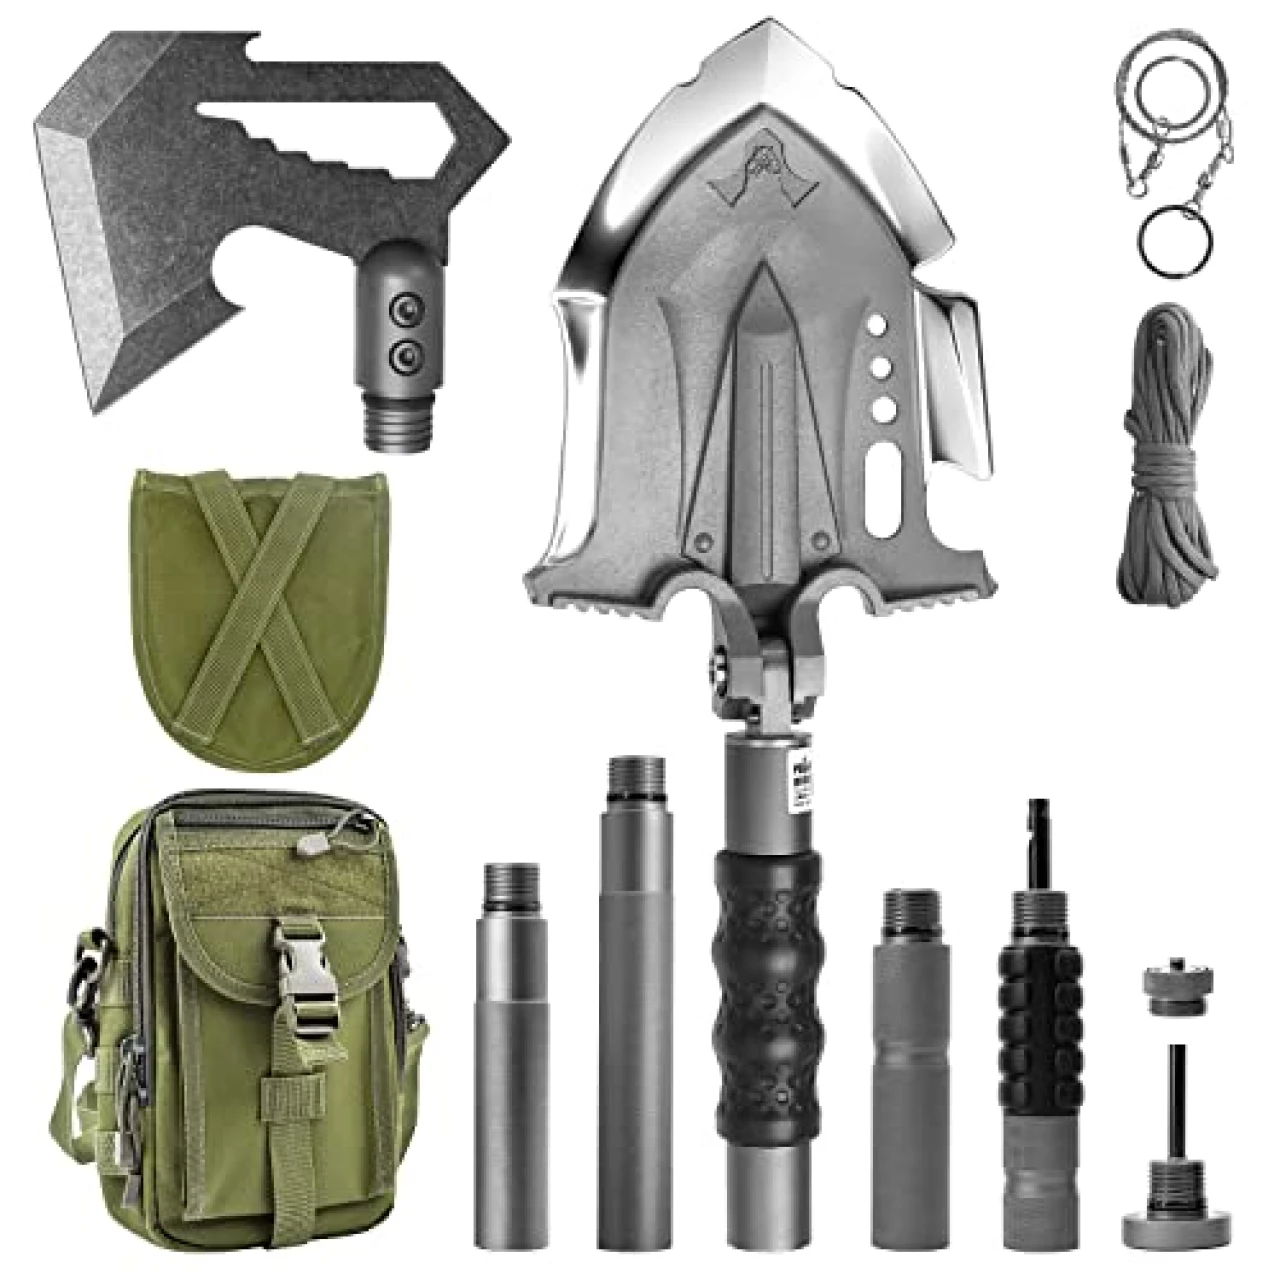 Zune Lotoo Survival Shovel Multitool with Axe, 29 in 1 Unbreakable Tactical Shovel Martensitic Steel kit, Compact Camping Shovel Folding Adjustable 7 Angles for Outdoors Gear Military Tool Gifts